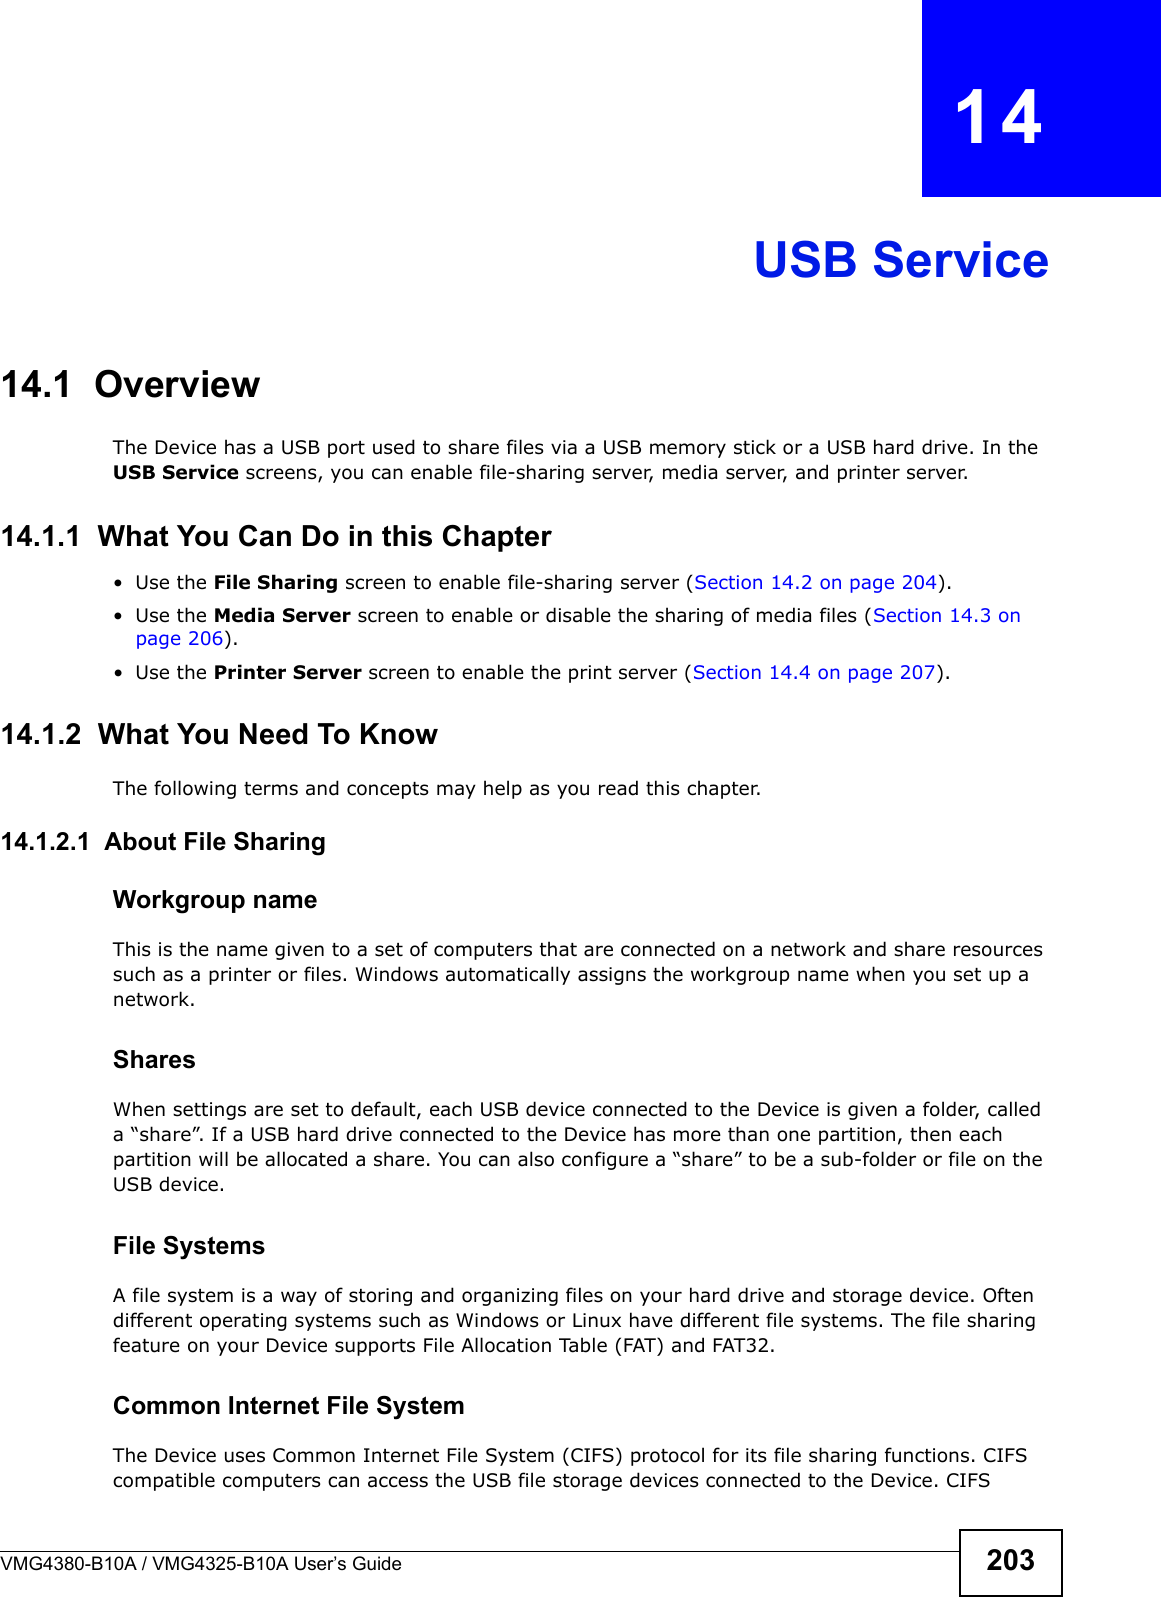 VMG4380-B10A / VMG4325-B10A User’s Guide 203CHAPTER  14USB Service14.1  Overview The Device has a USB port used to share files via a USB memory stick or a USB hard drive. In the USB Service screens, you can enable file-sharing server, media server, and printer server.14.1.1  What You Can Do in this Chapter• Use the File Sharing screen to enable file-sharing server (Section 14.2 on page 204). • Use the Media Server screen to enable or disable the sharing of media files (Section 14.3 onpage 206).• Use the Printer Server screen to enable the print server (Section 14.4 on page 207).14.1.2  What You Need To KnowThe following terms and concepts may help as you read this chapter.14.1.2.1  About File SharingWorkgroup nameThis is the name given to a set of computers that are connected on a network and share resources such as a printer or files. Windows automatically assigns the workgroup name when you set up a network. SharesWhen settings are set to default, each USB device connected to the Device is given a folder, called a “share”. If a USB hard drive connected to the Device has more than one partition, then eachpartition will be allocated a share. You can also configure a “share” to be a sub-folder or file on the USB device.File SystemsA file system is a way of storing and organizing files on your hard drive and storage device. Often different operating systems such as Windows or Linux have different file systems. The file sharing feature on your Device supports File Allocation Table (FAT) and FAT32.Common Internet File SystemThe Device uses Common Internet File System (CIFS) protocol for its file sharing functions. CIFScompatible computers can access the USB file storage devices connected to the Device. CIFS 